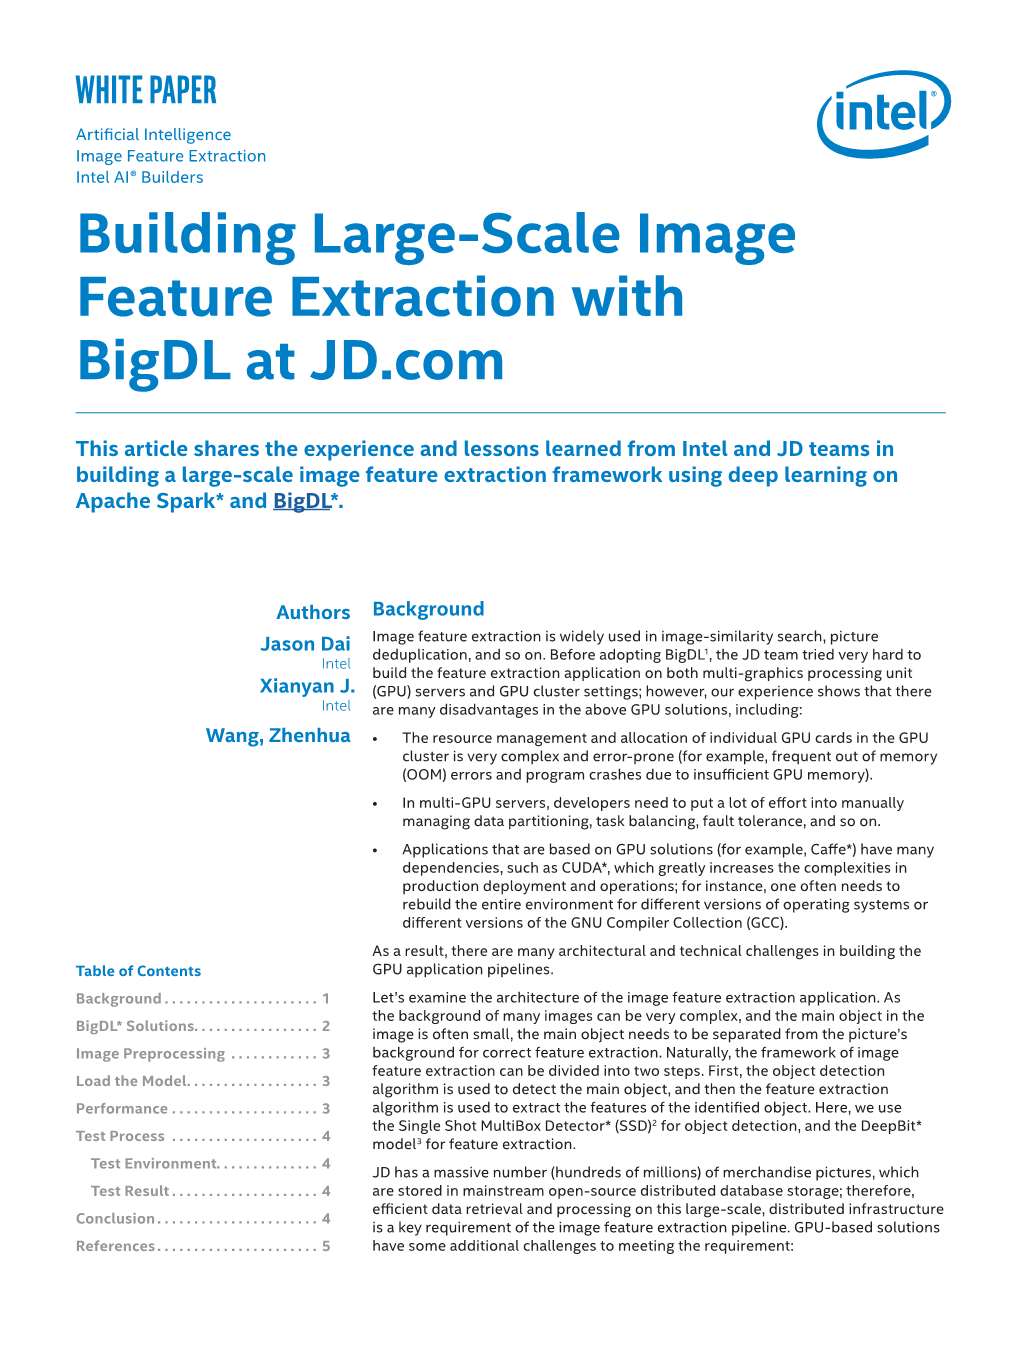 Building Large-Scale Image Feature Extraction with Bigdl at JD .Com